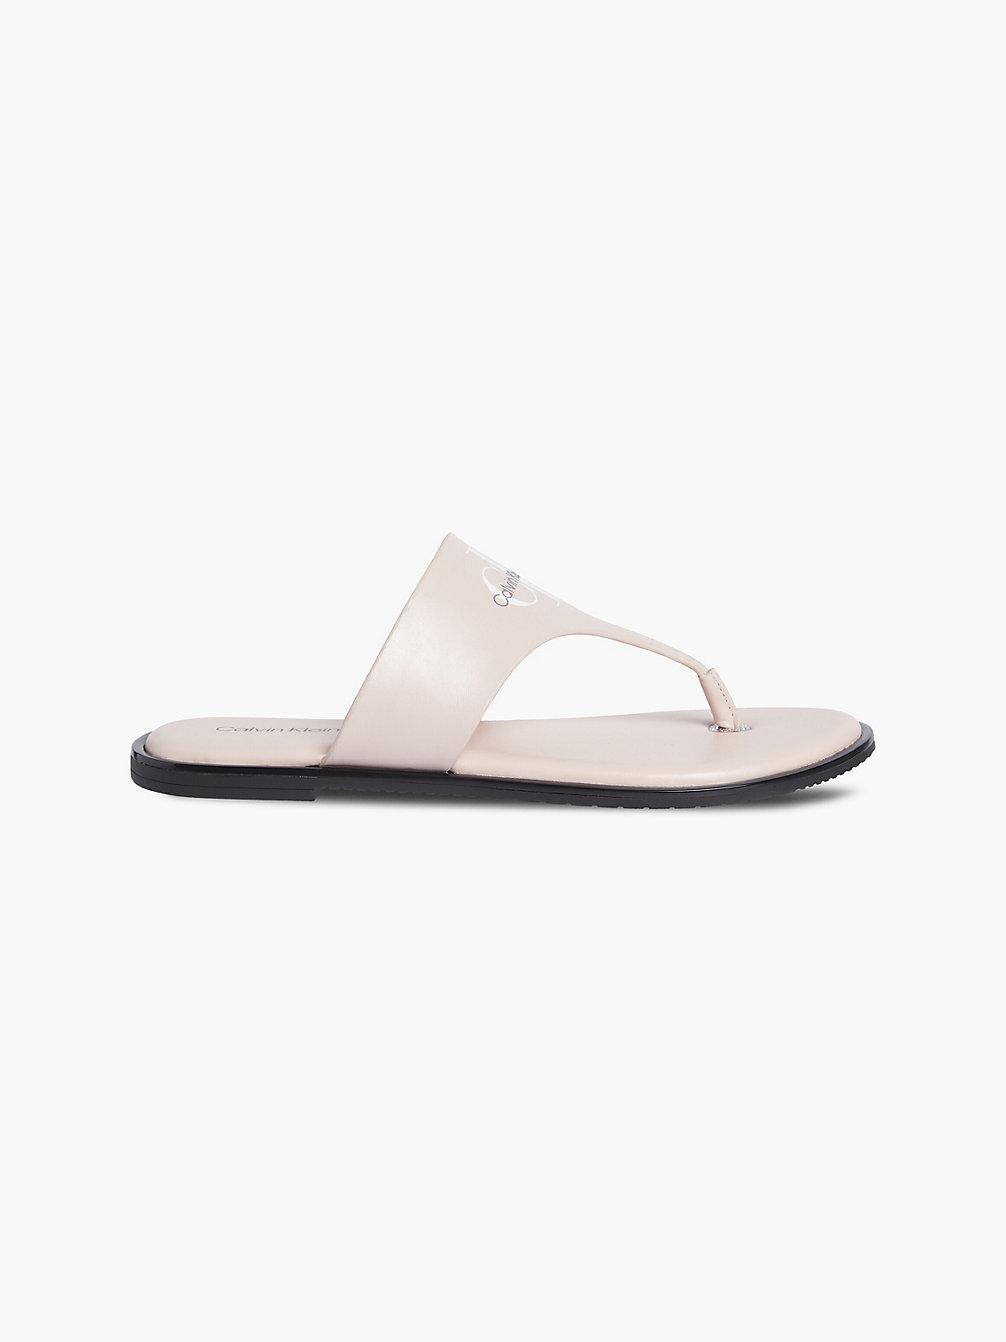 PALE CONCH SHELL Leather Sandals undefined women Calvin Klein